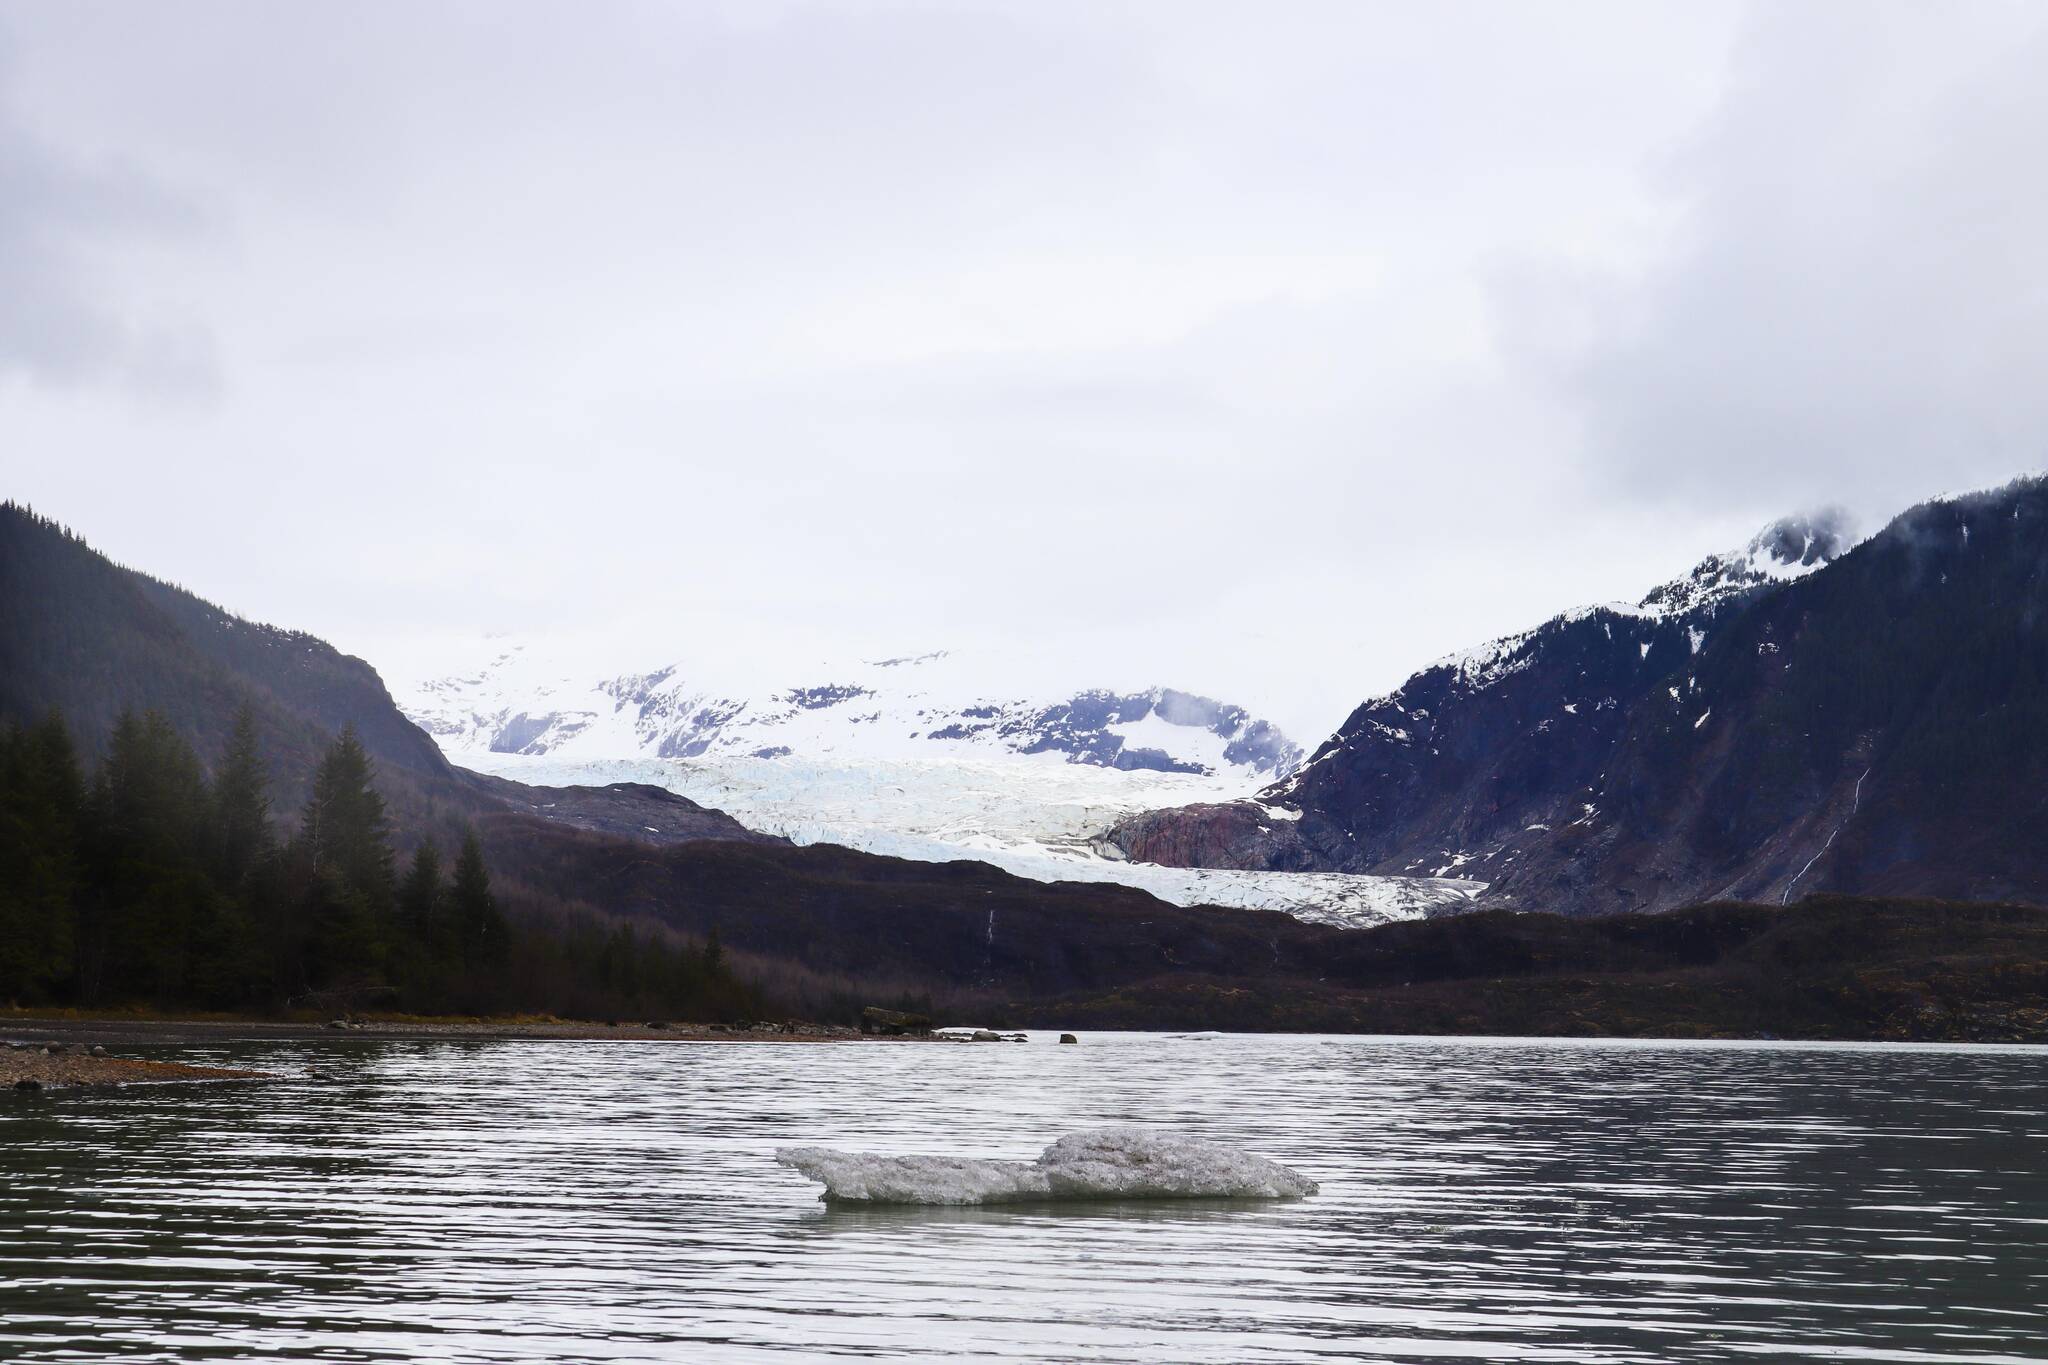 Michael S. Lockett / Juneau Empire 
Gov. Mike Dunleavy asserted that Alaskans are able to user motorized watercraft in the Mendenhall Lake, contrary to longstanding practice, in a news conference on April 26, 2022.